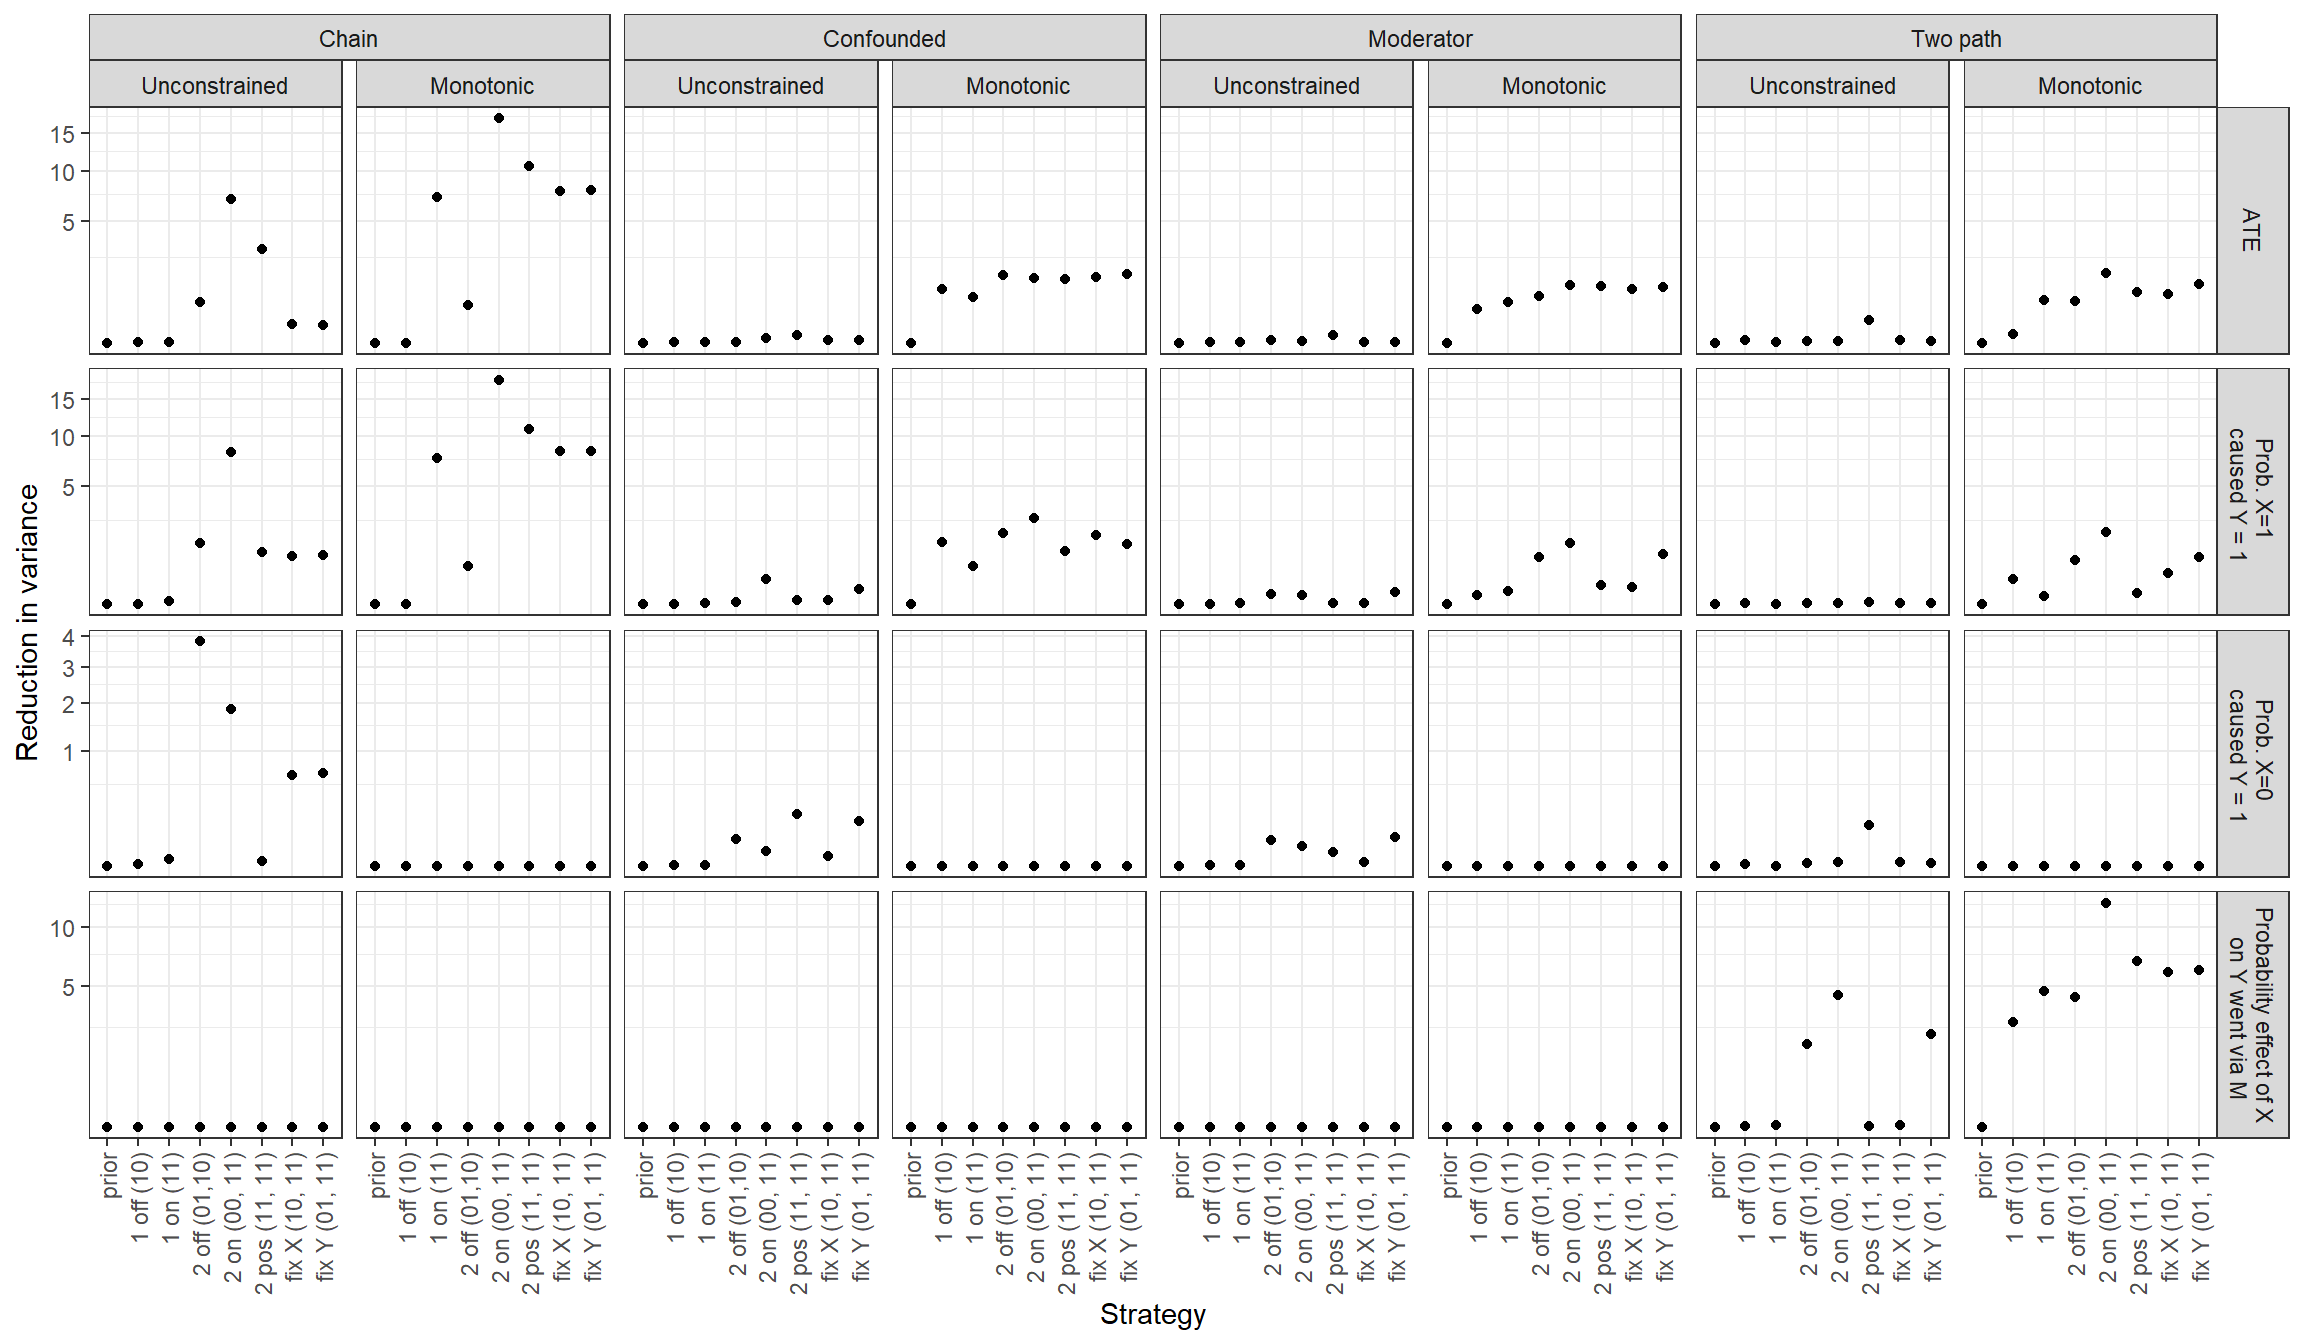 Reduction in variance on each query given different models and case-selection strategies